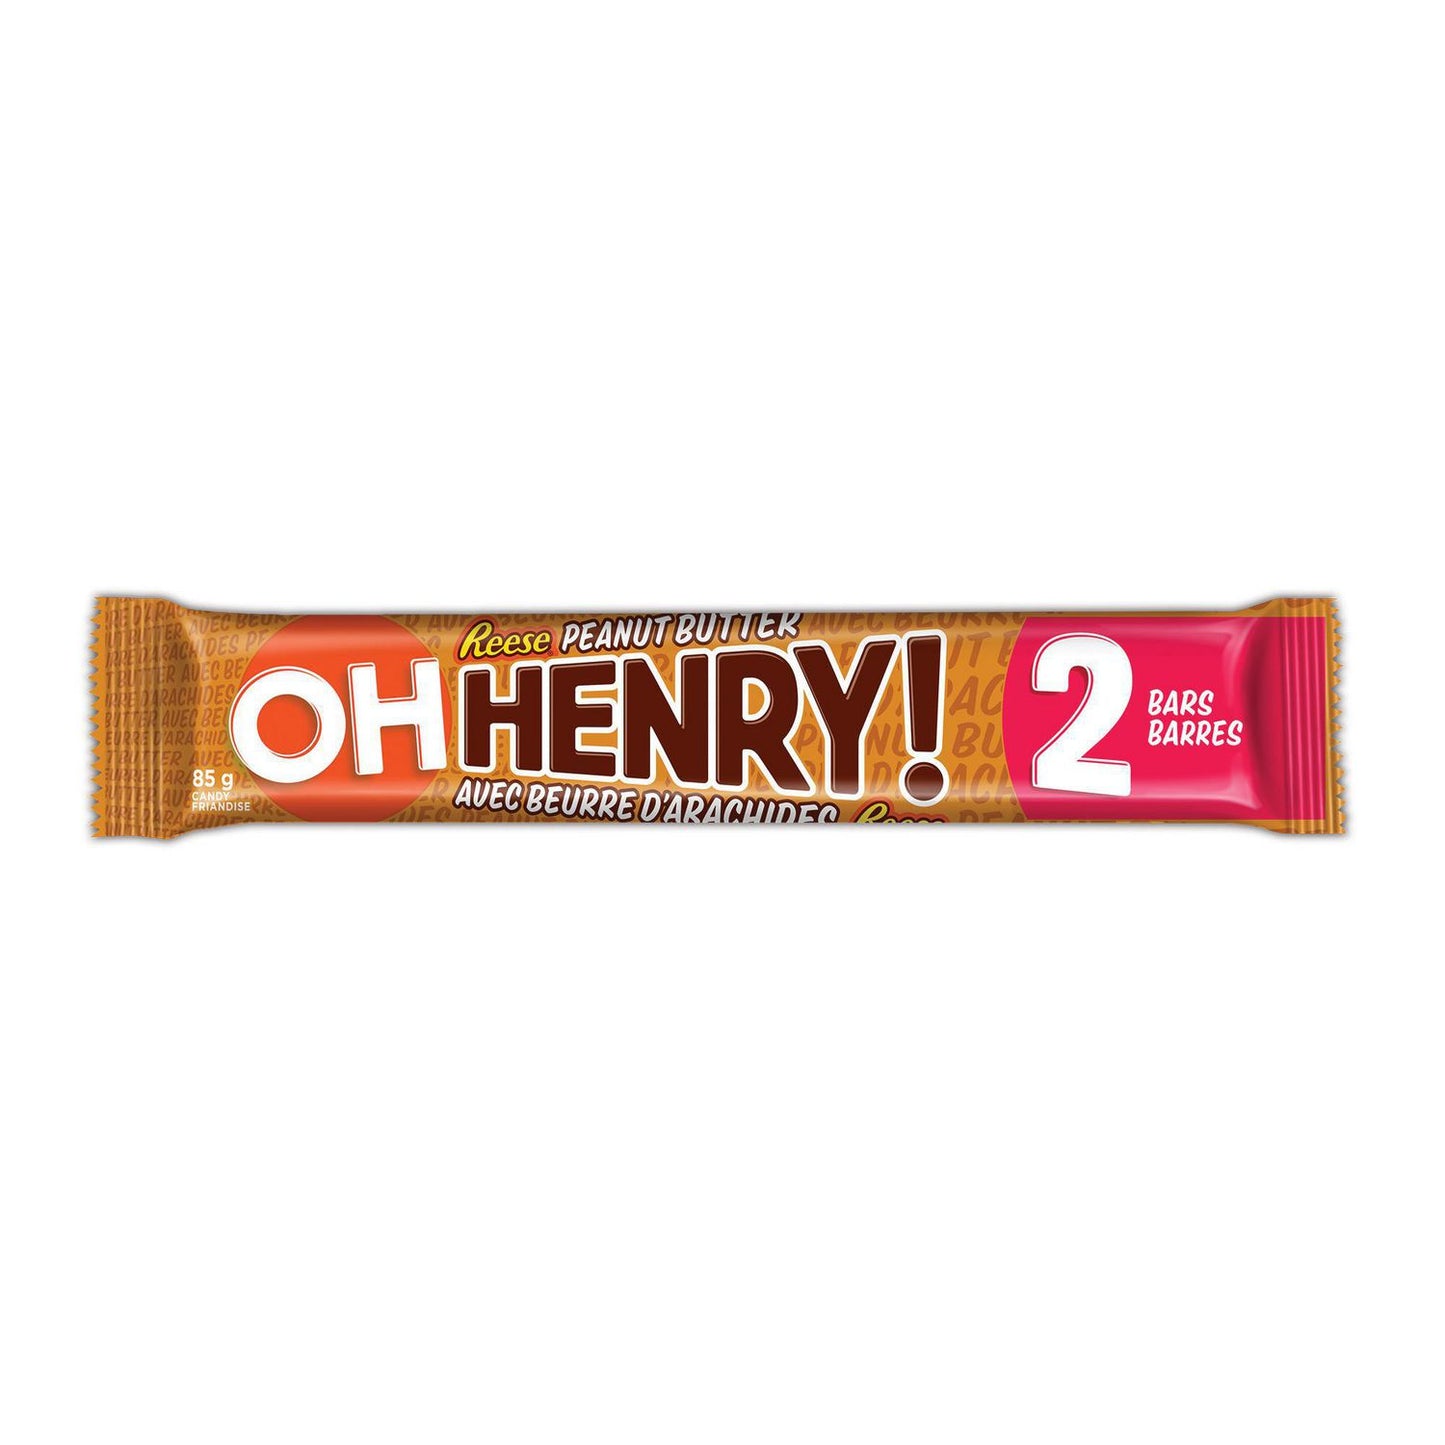 Oh Henry! Reese's Peanut Butter Bar 85g - Case of 24